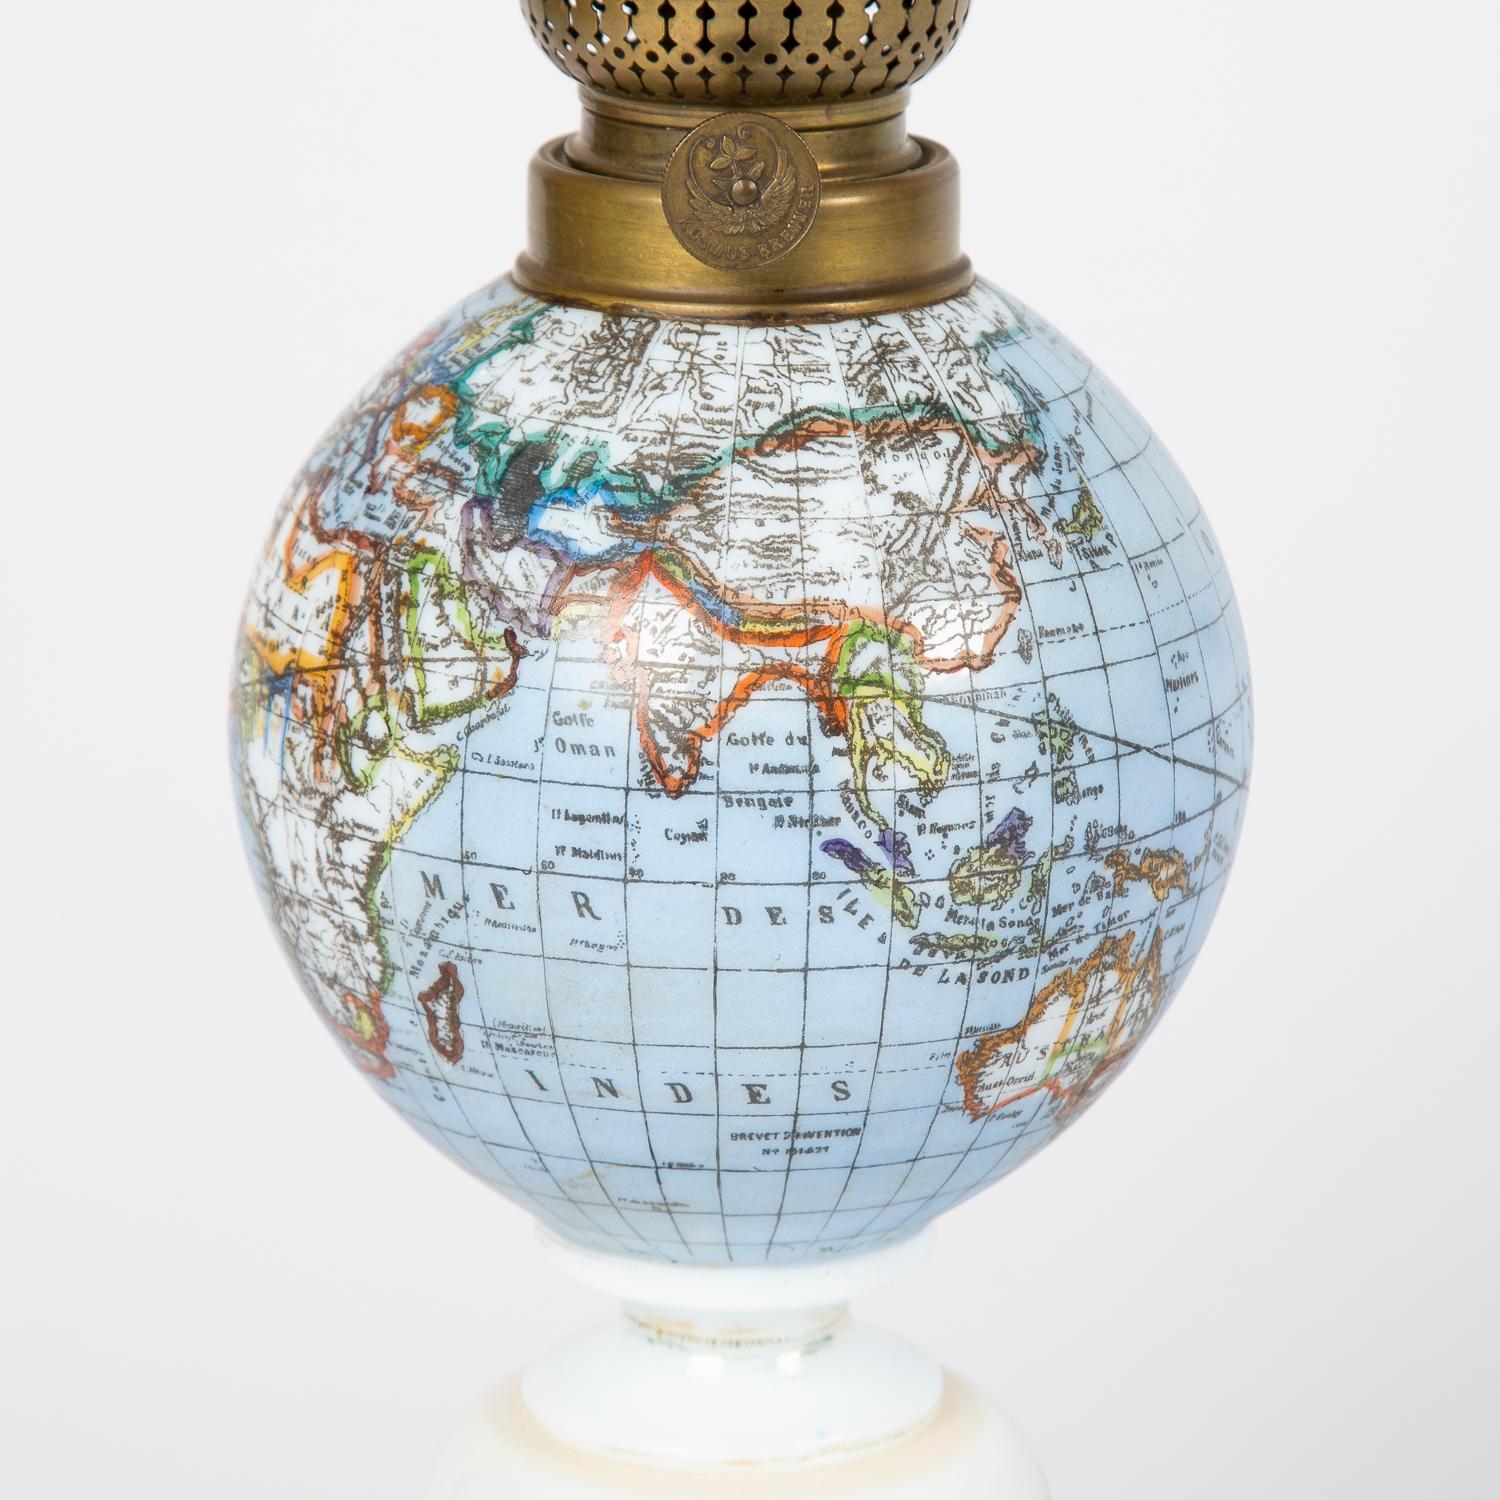 A rare late 19th century oil lamp with a globe shade and base decorated with a castle set in a rural scene, circa 1885.

Northern European for the French market. The countries and seas indicated on the globe written in French. 

Burner made by